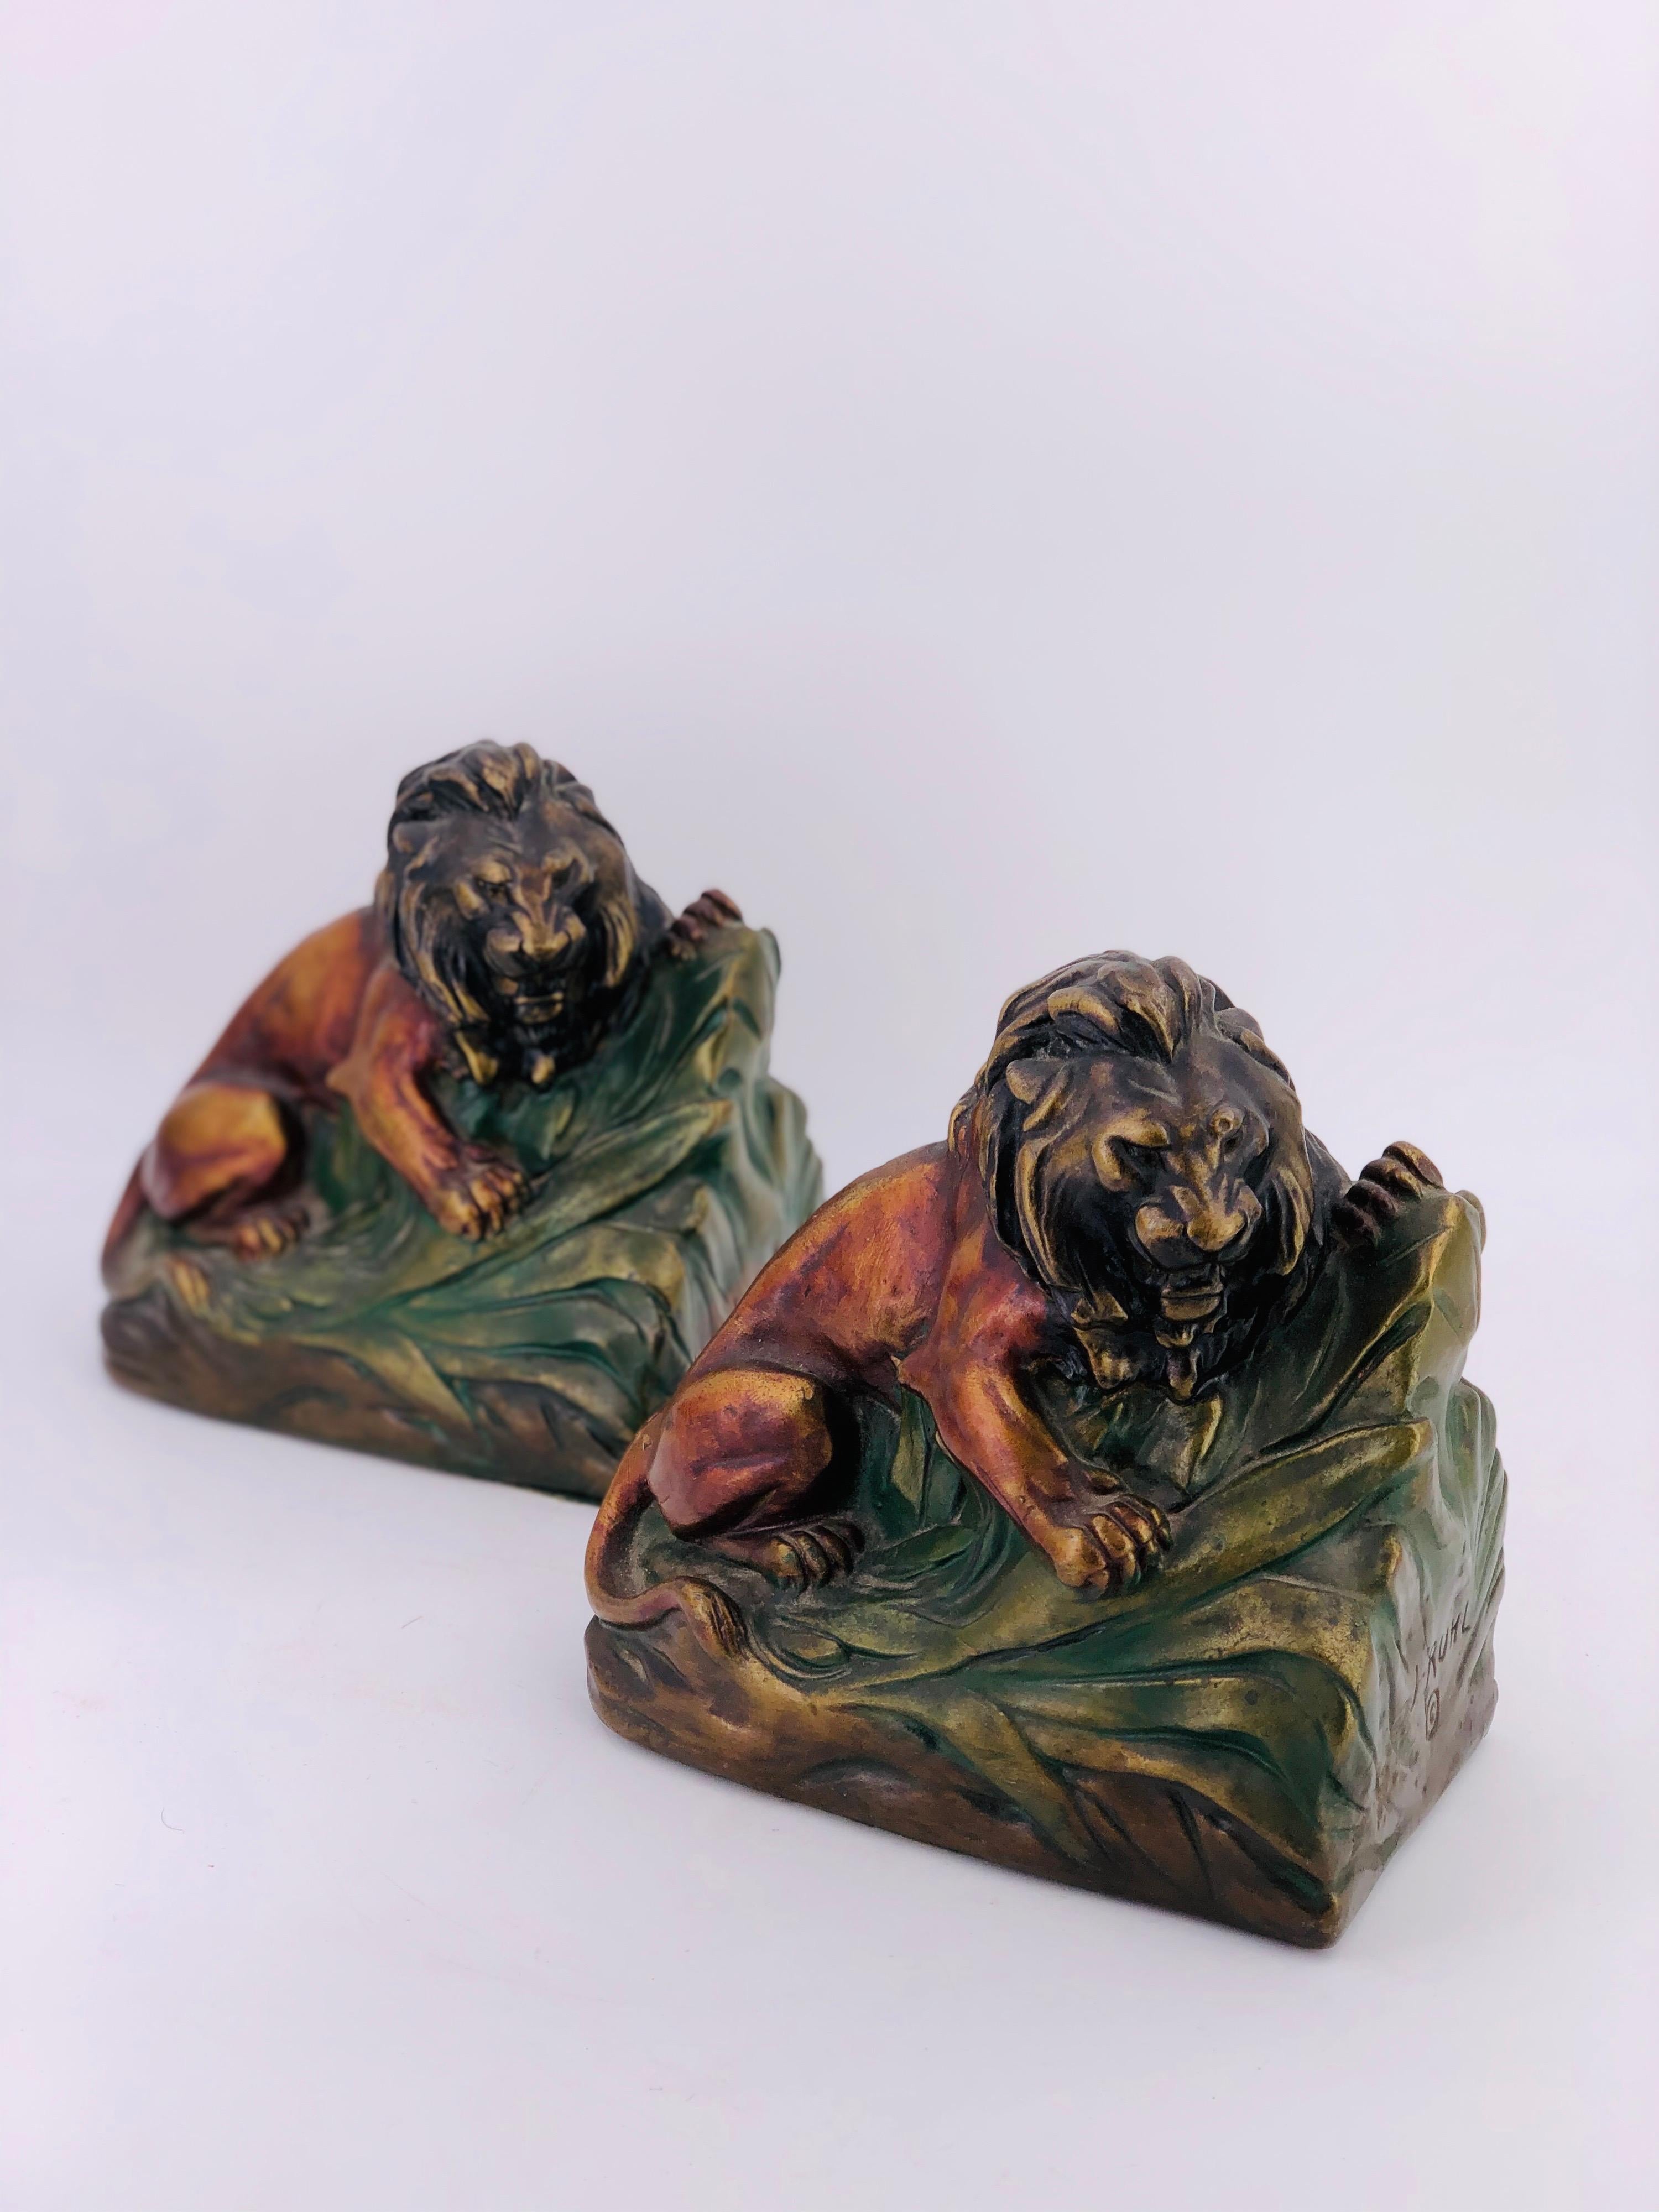 Rare 1920s armor bronze clad lion bookends pair vintage.

Very hard to find a pair of 1920s Armor bronze-clad lion bookends. These stunning bookends are in very good condition. Often, the bronze cladding gets cracked. We see no cracks on these.